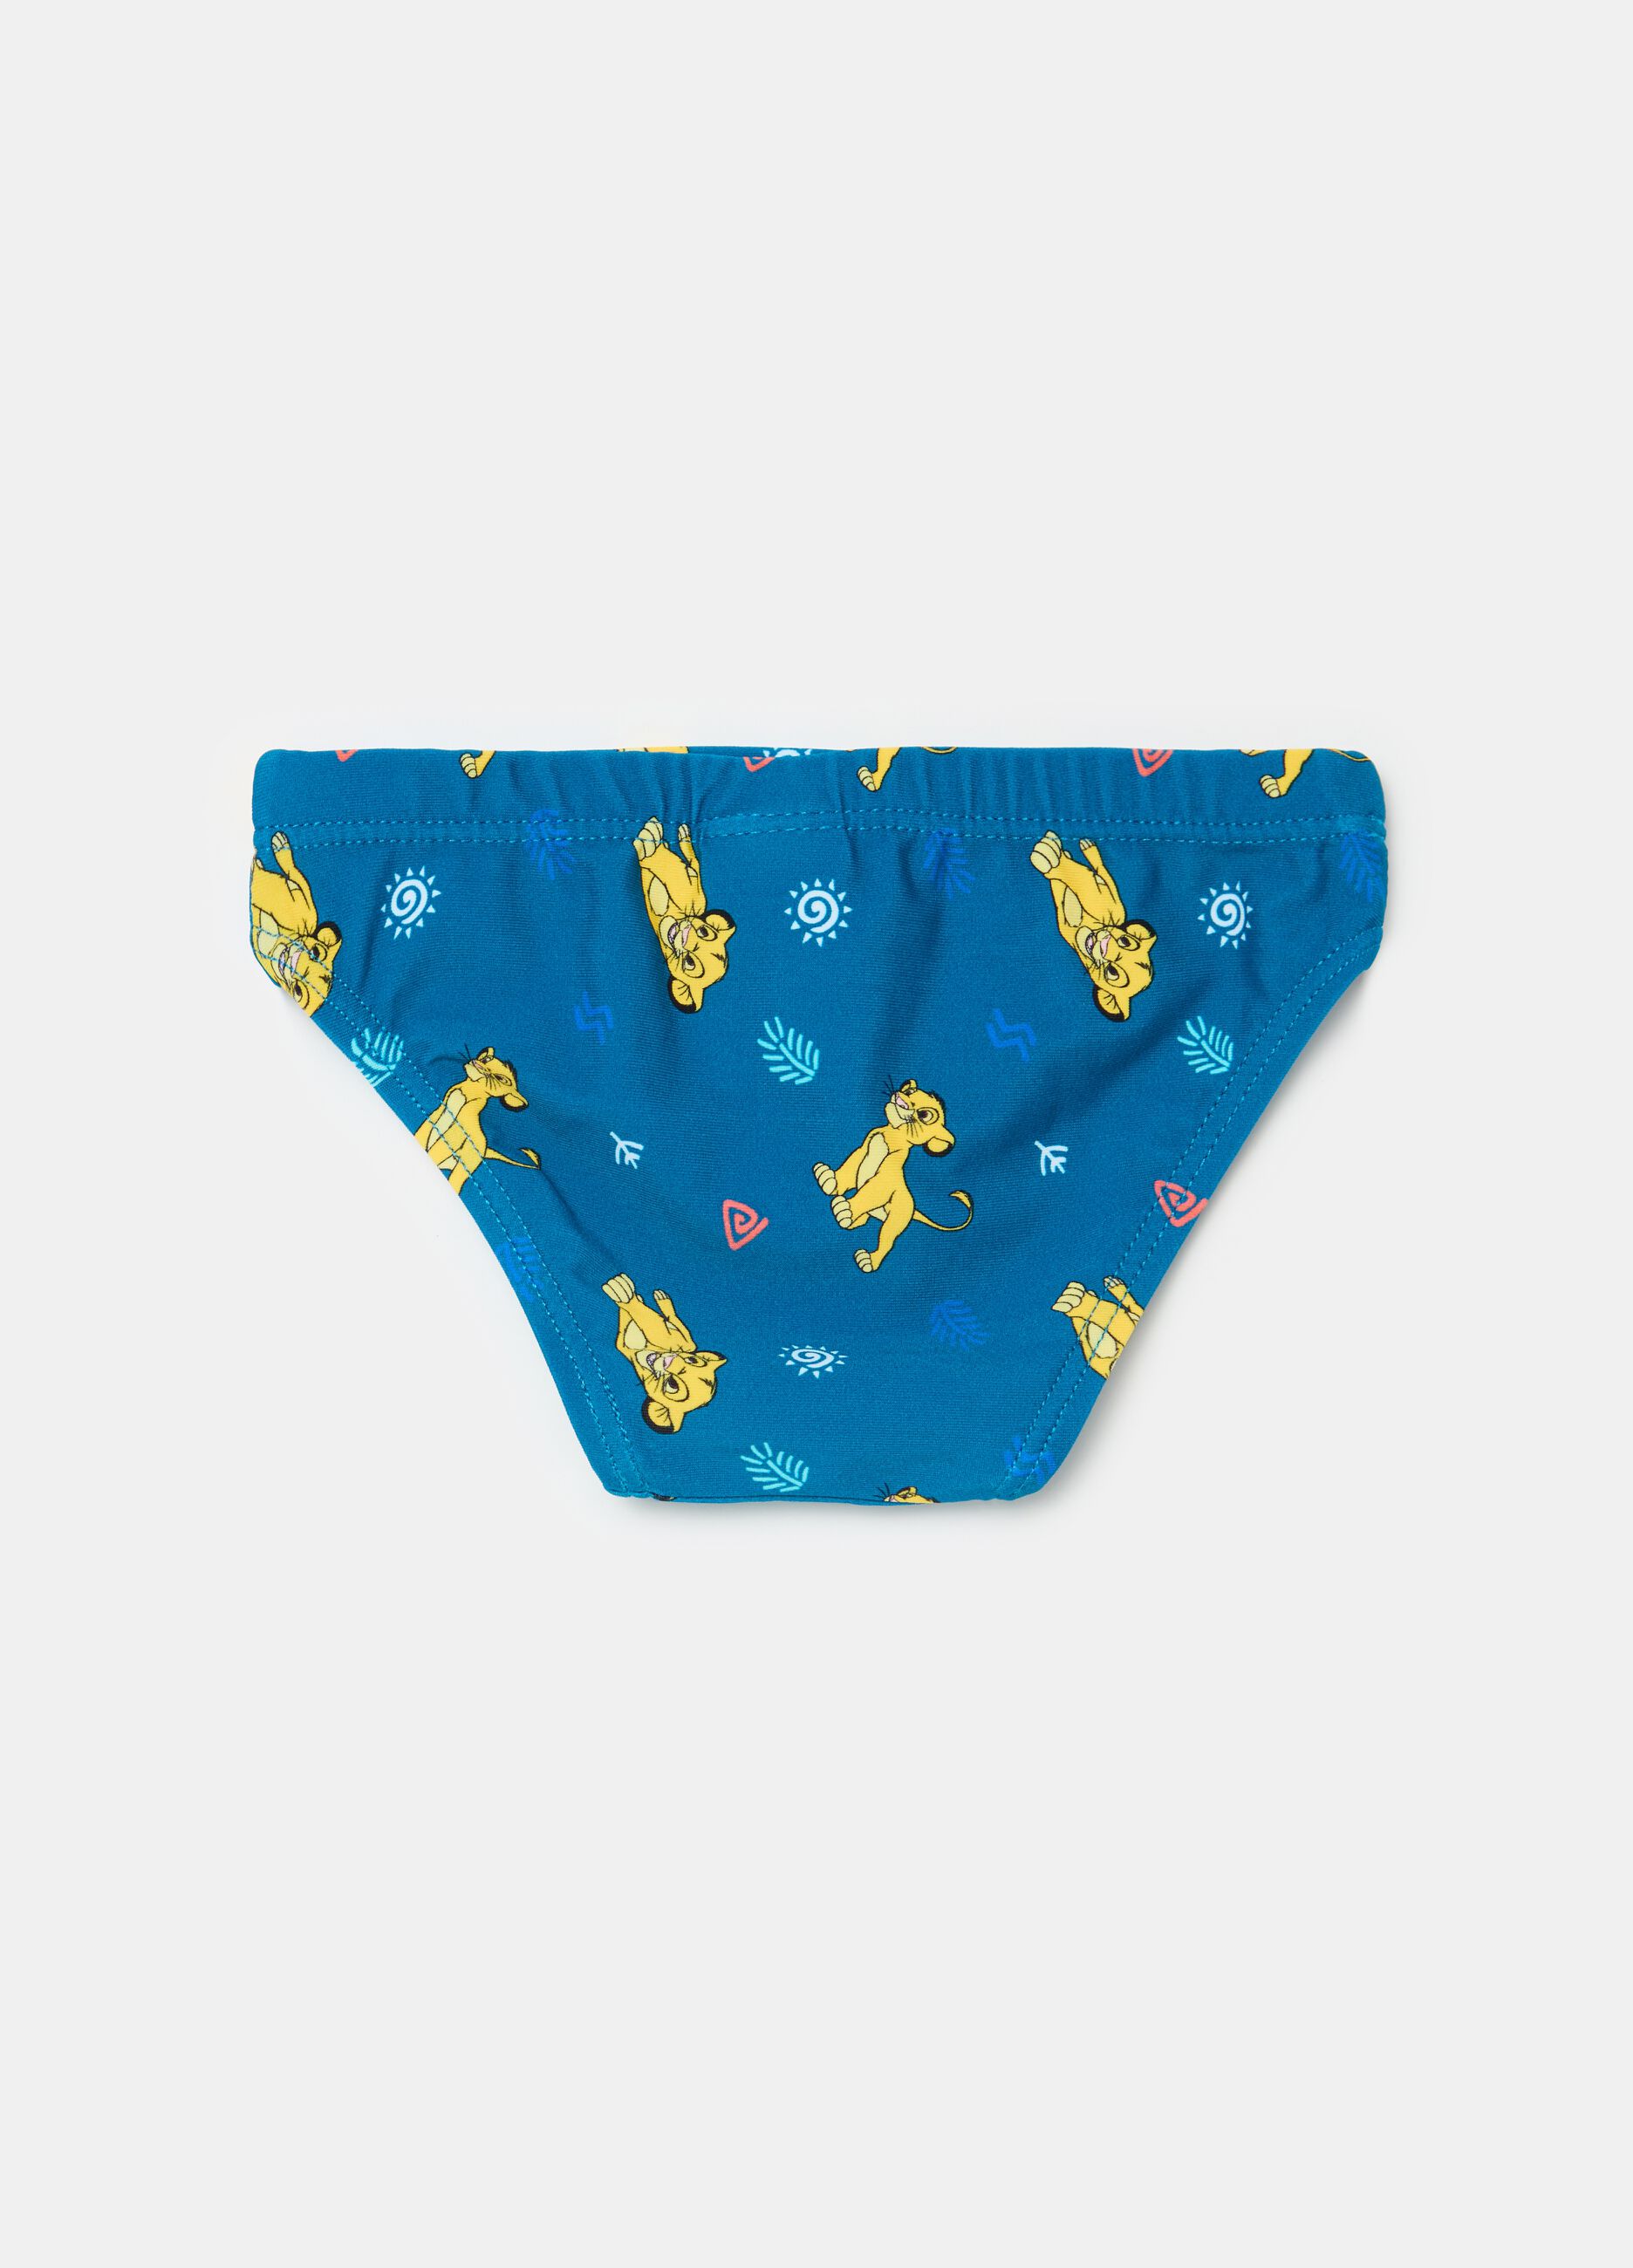 Swim briefs with The Lion King print